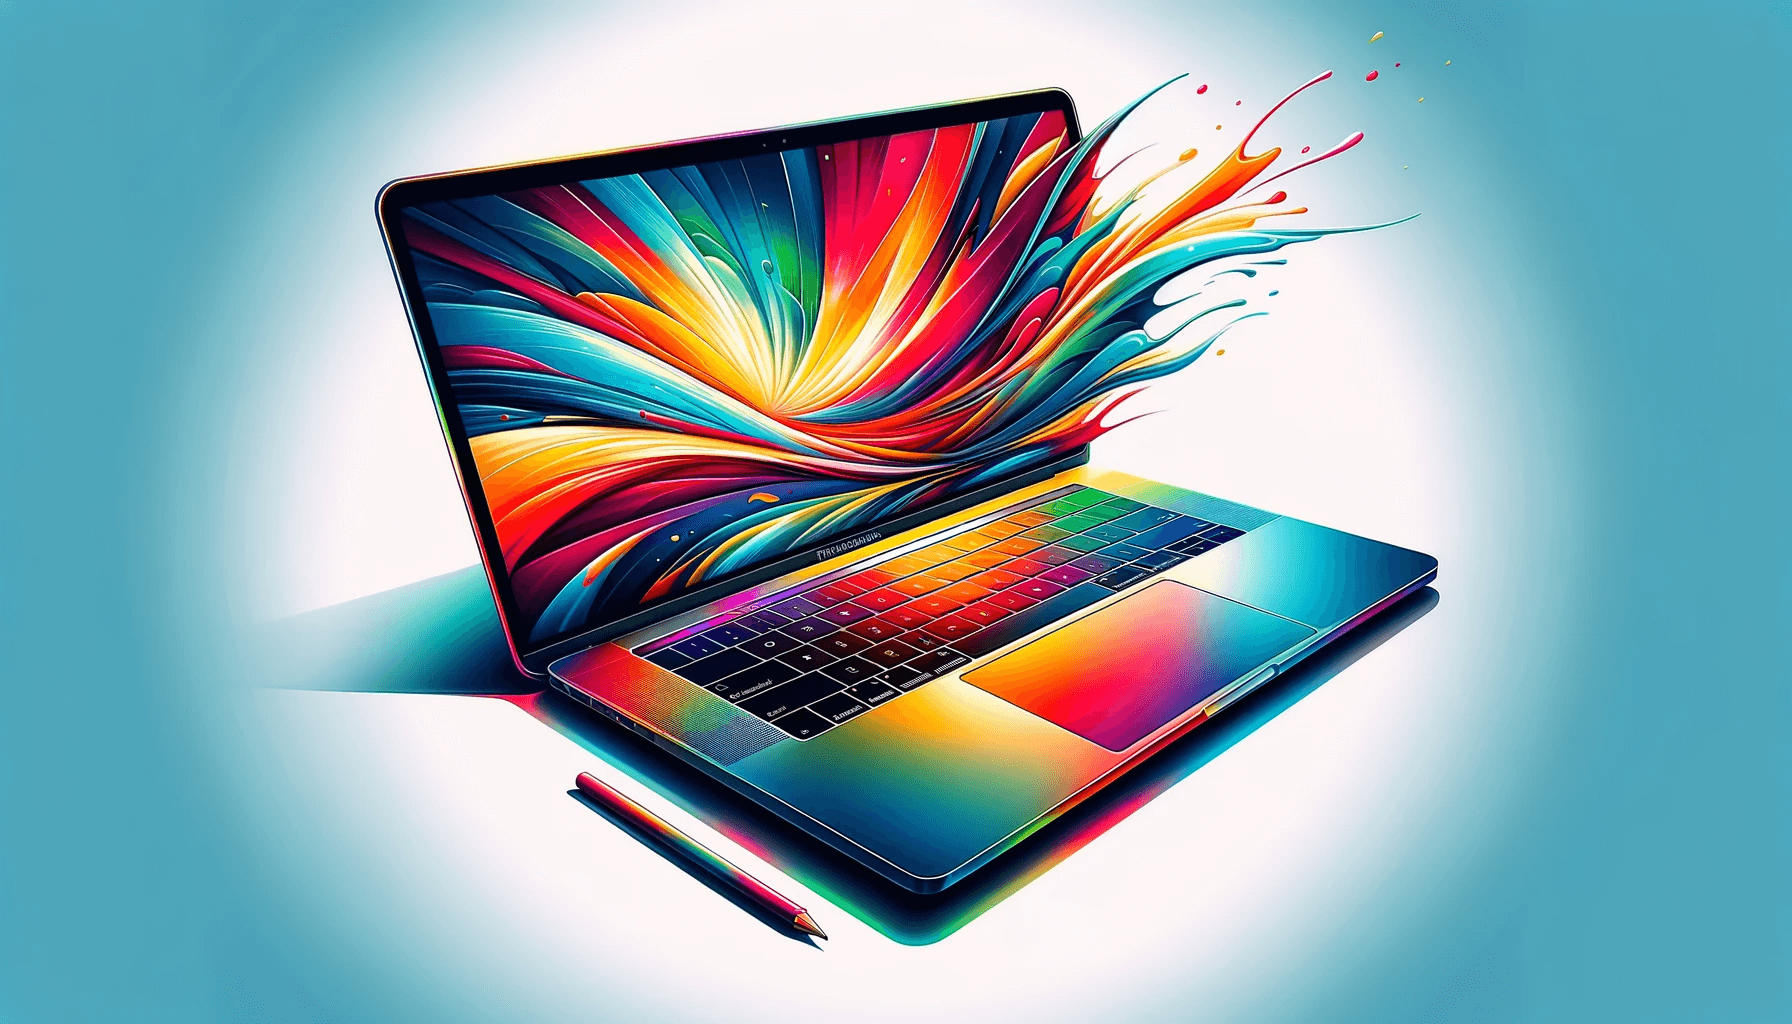 DALL·E 2023 11 24 17.50.18 A stunning digital illustration of a MacBook portrayed in a vibrant and colorful style. The MacBook is depicted open showcasing its sleek design and